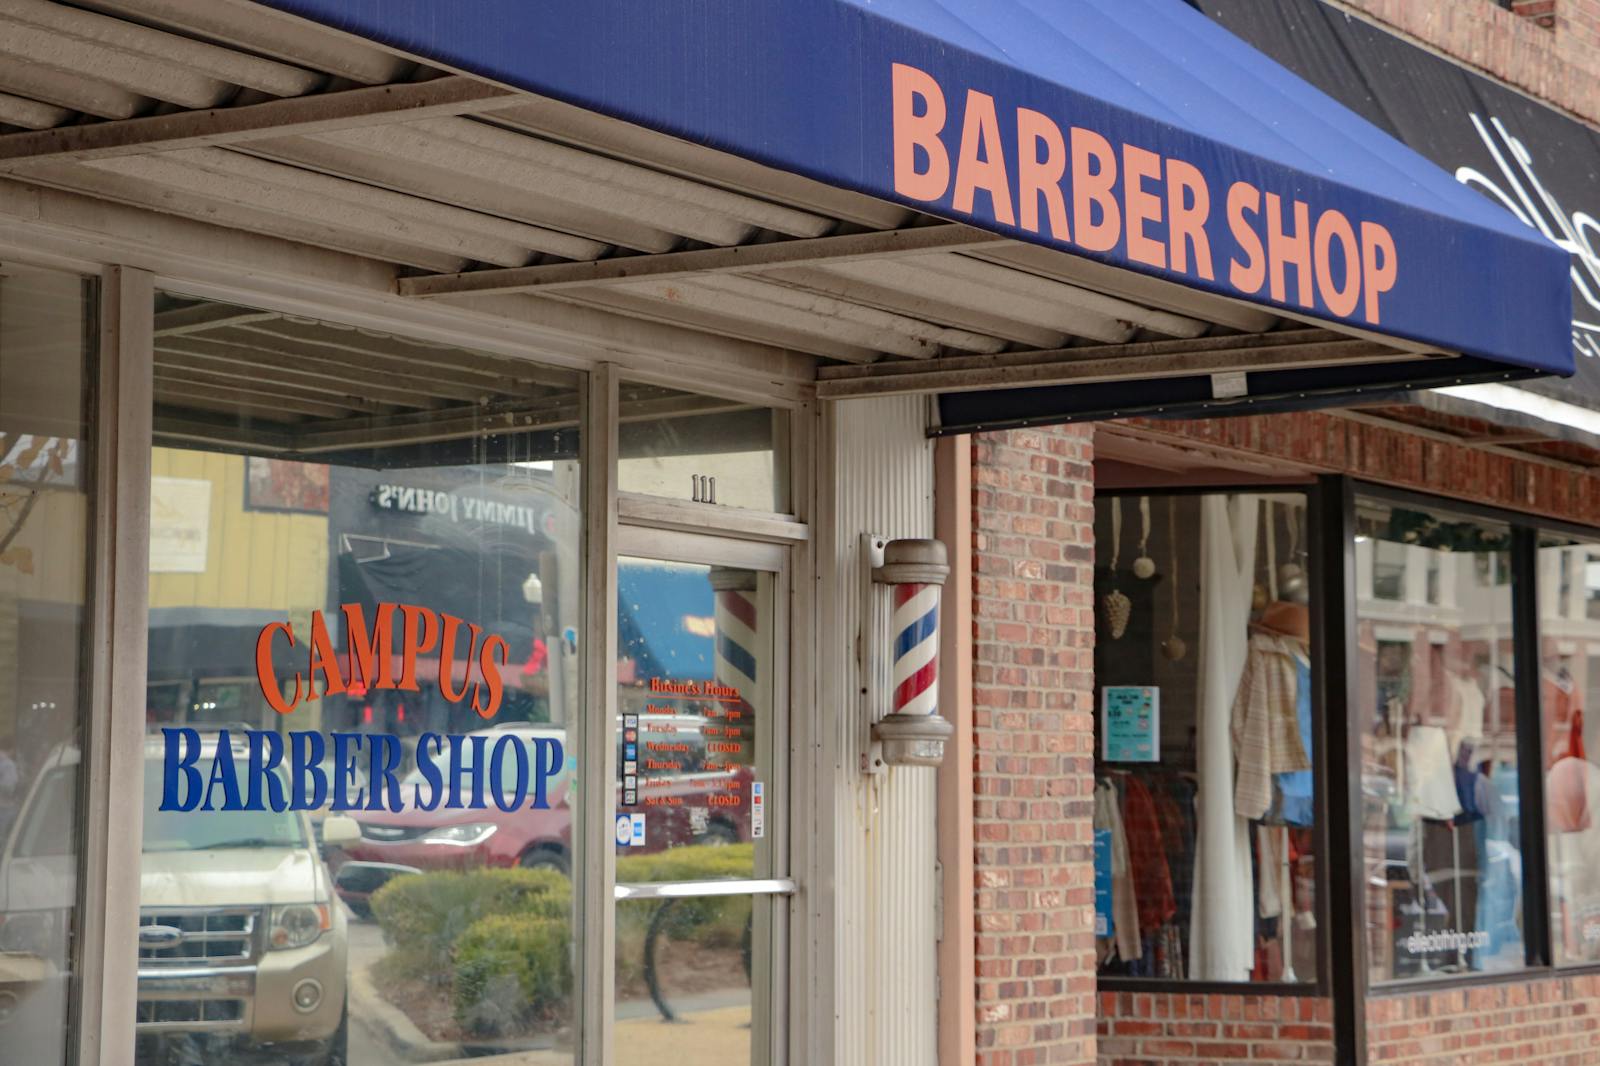 The Barbershop - NCAA Basketball on at the shop all day!!!!